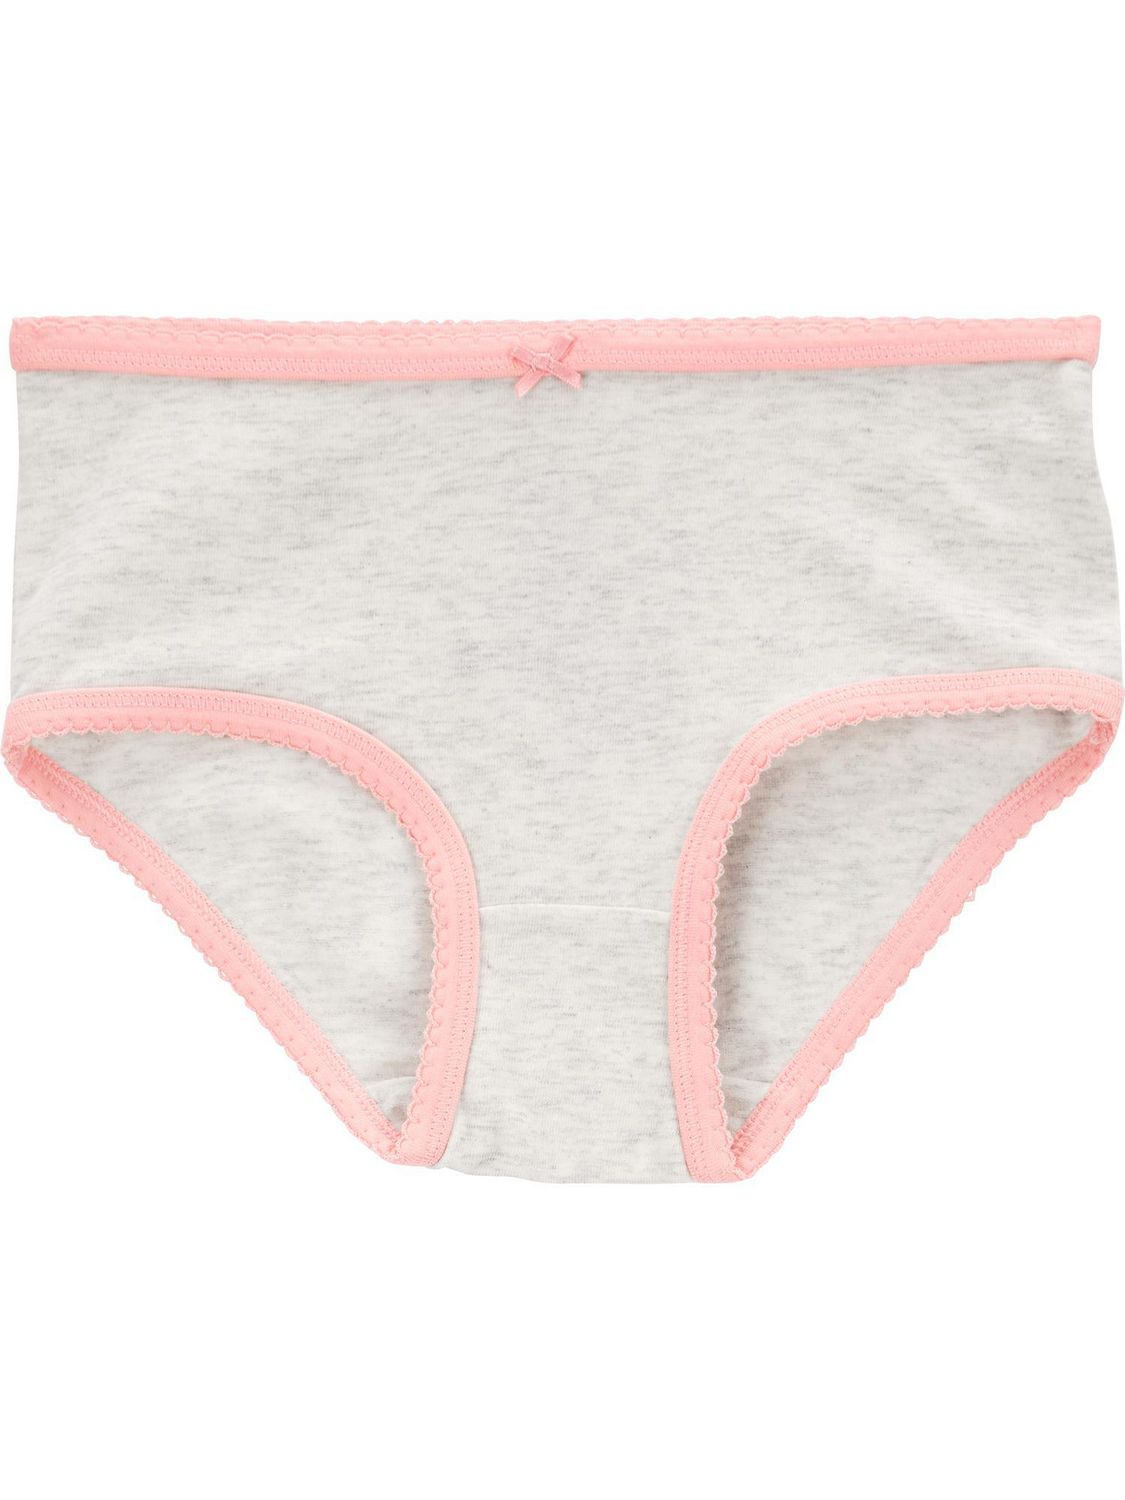 minnie underwear gots - cherry  Charlie Ray Shop for babies and kids